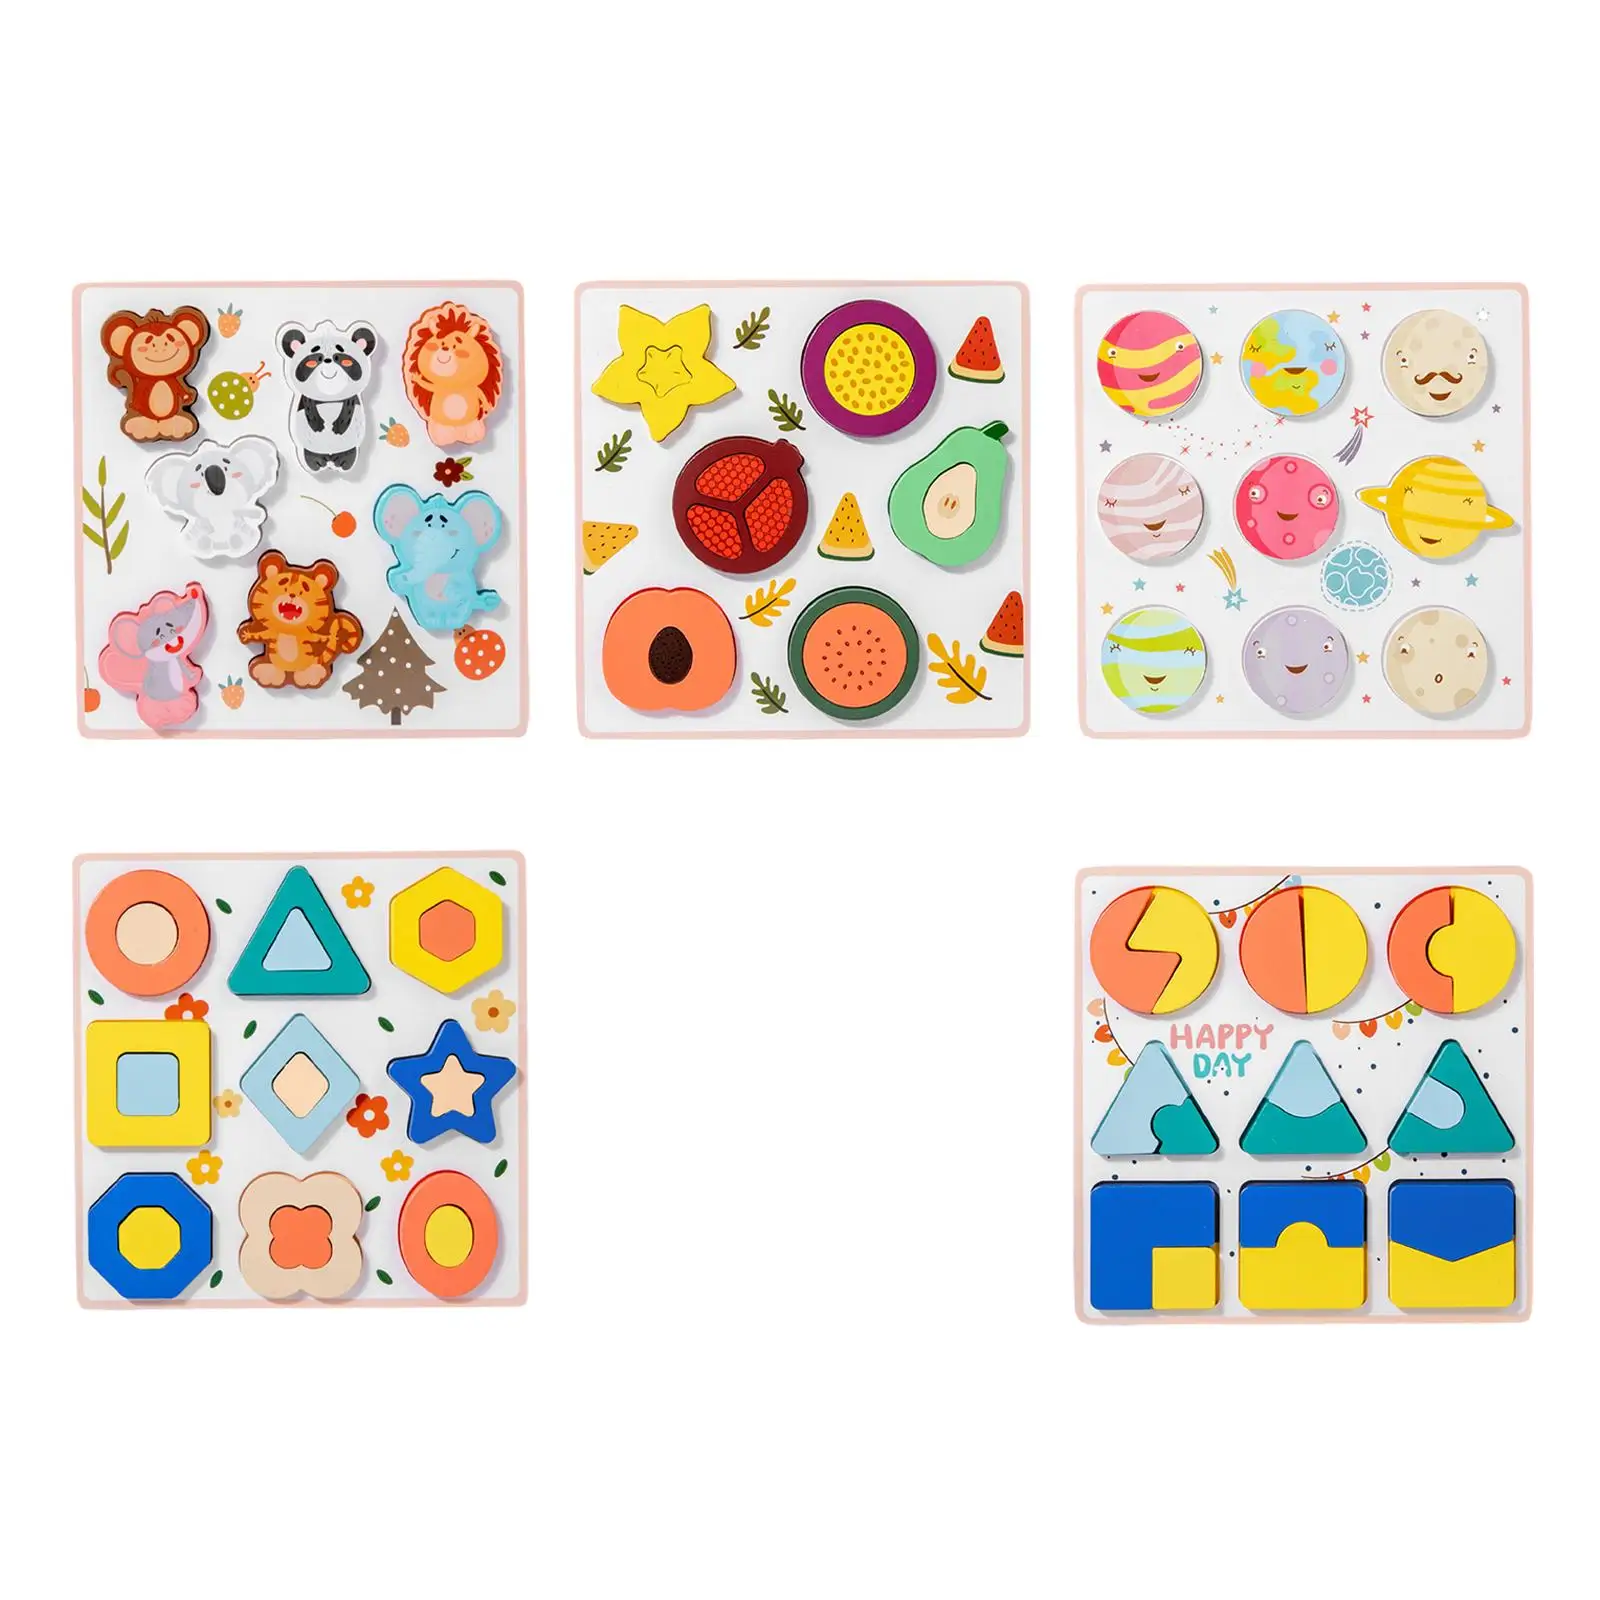 

Wooden Puzzle Children Early Education Learning Toy Colors and Shapes Cognition for Girls Boys 1 2 3 Year Old Kids Toddlers Gift